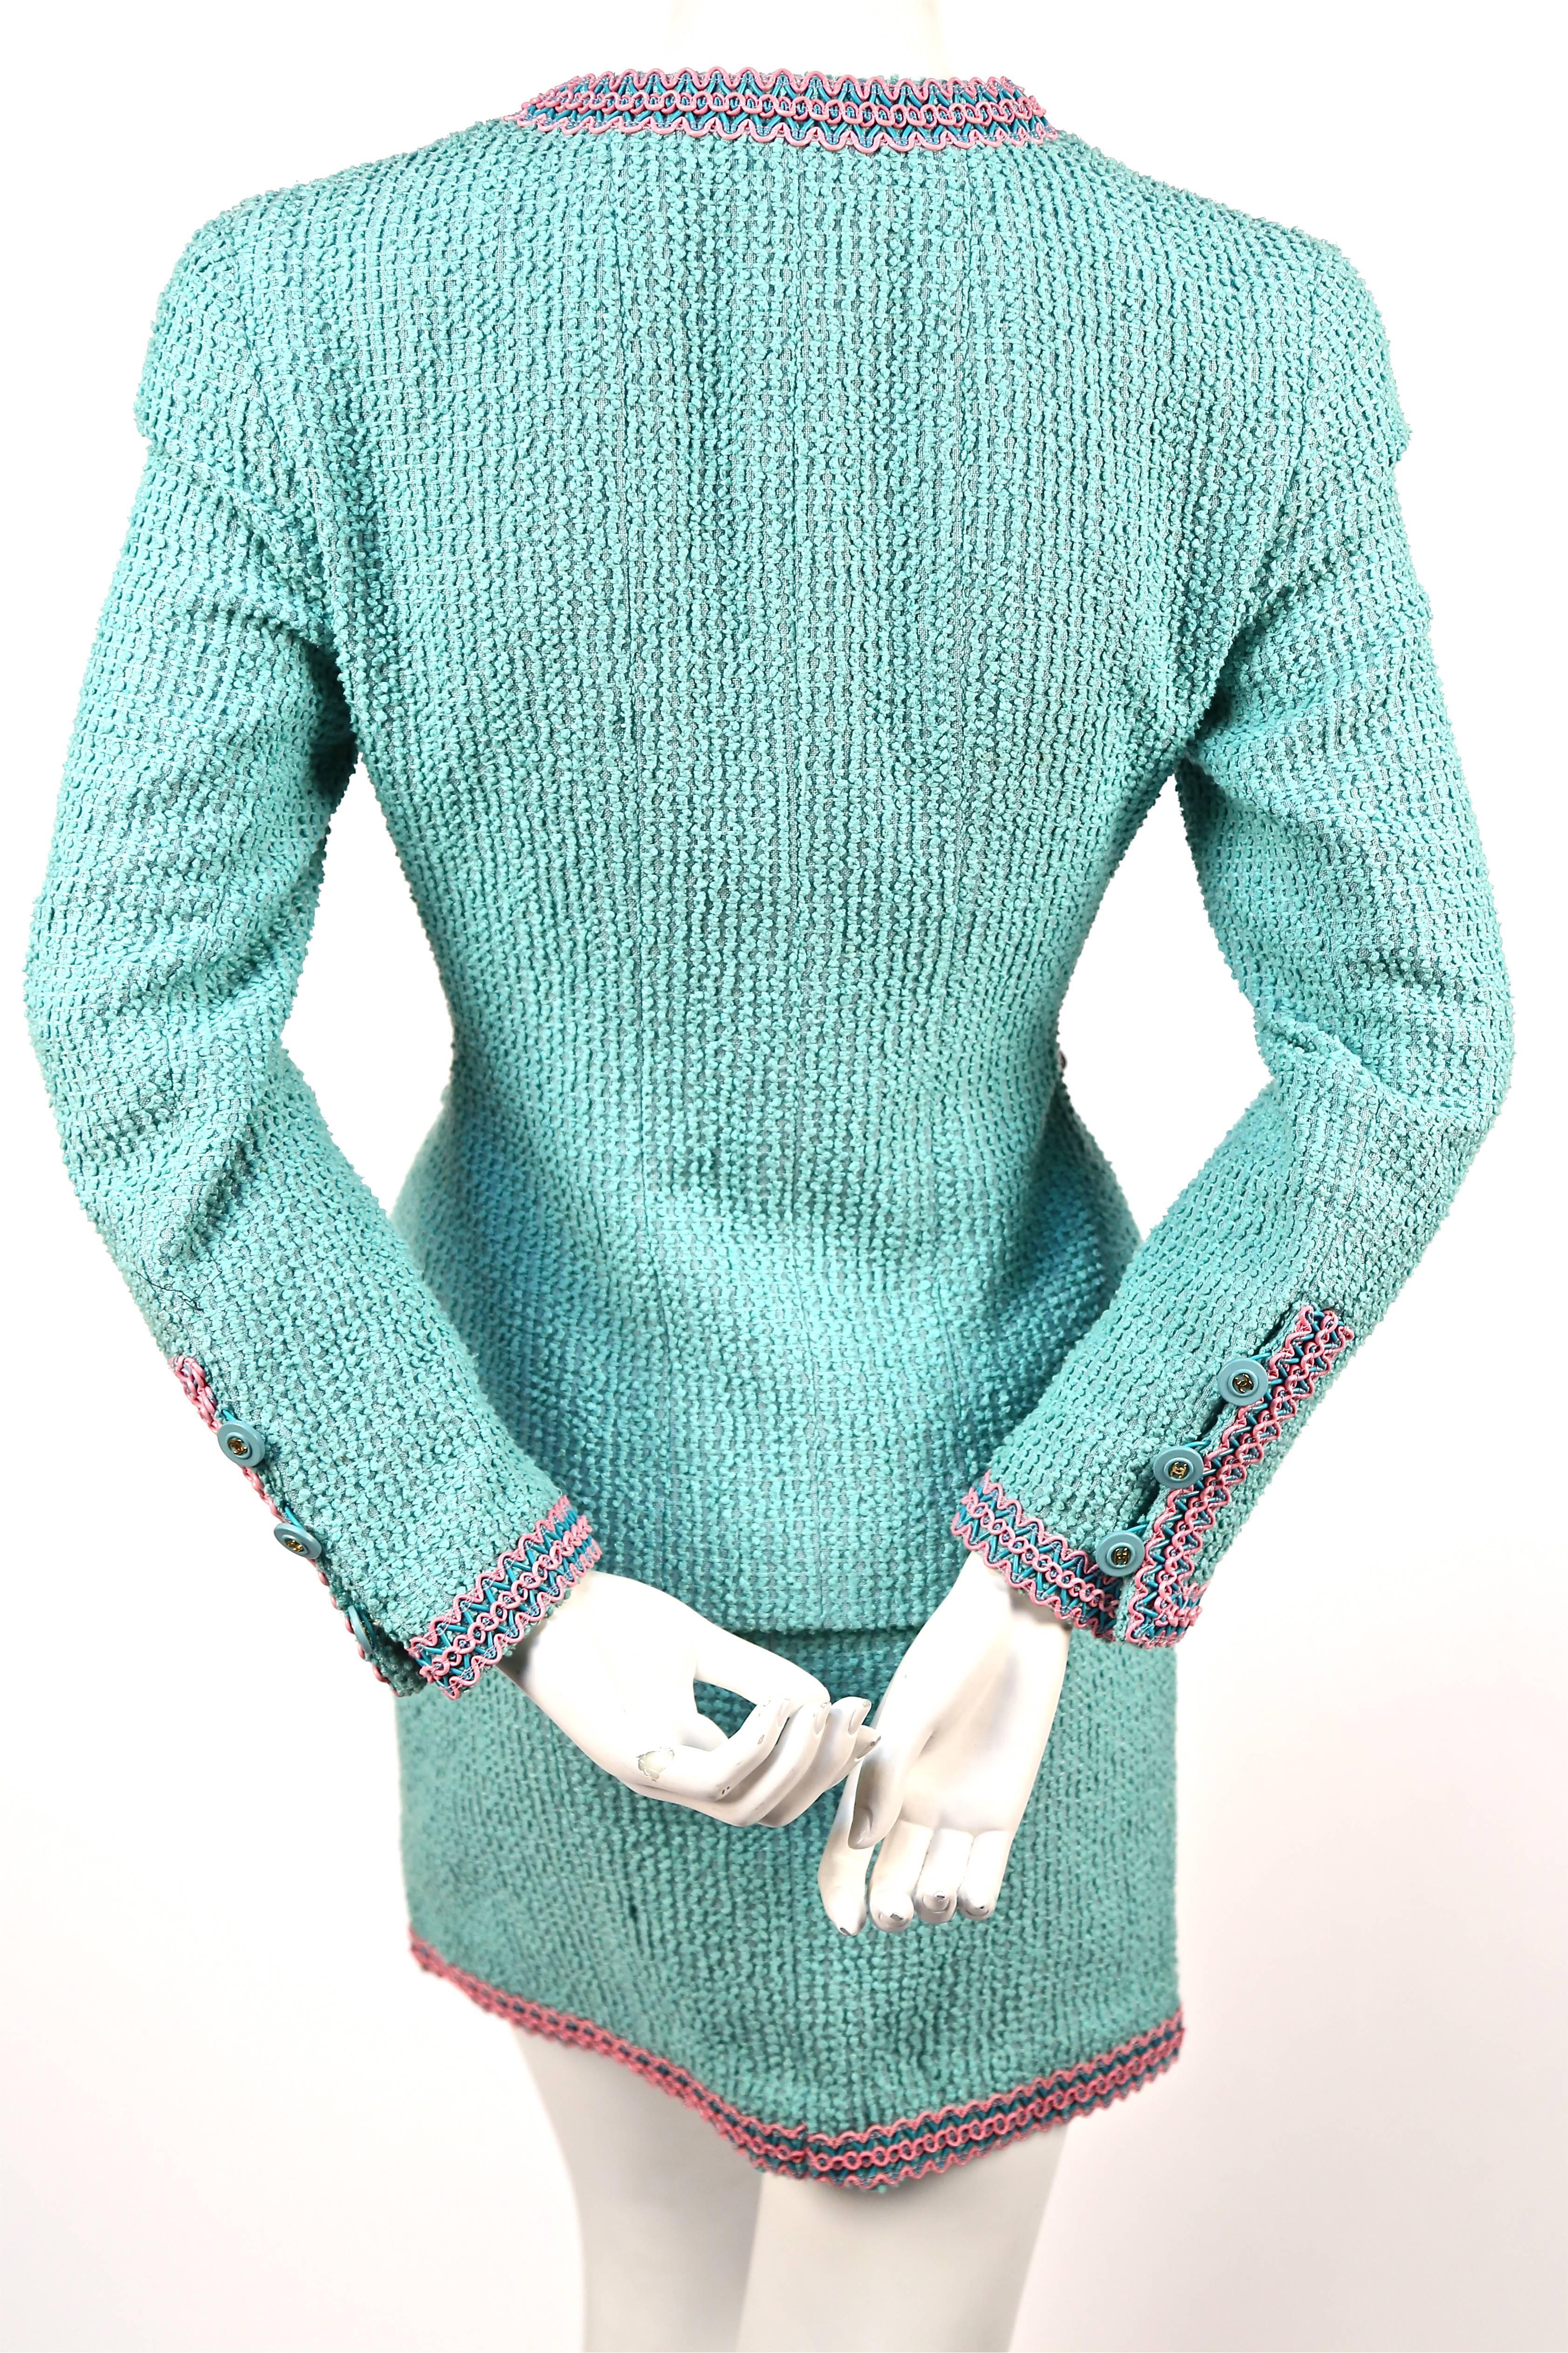 Blue 1994 CHANEL turquoise boucle runway 'Scoubidou' suit with braided trim